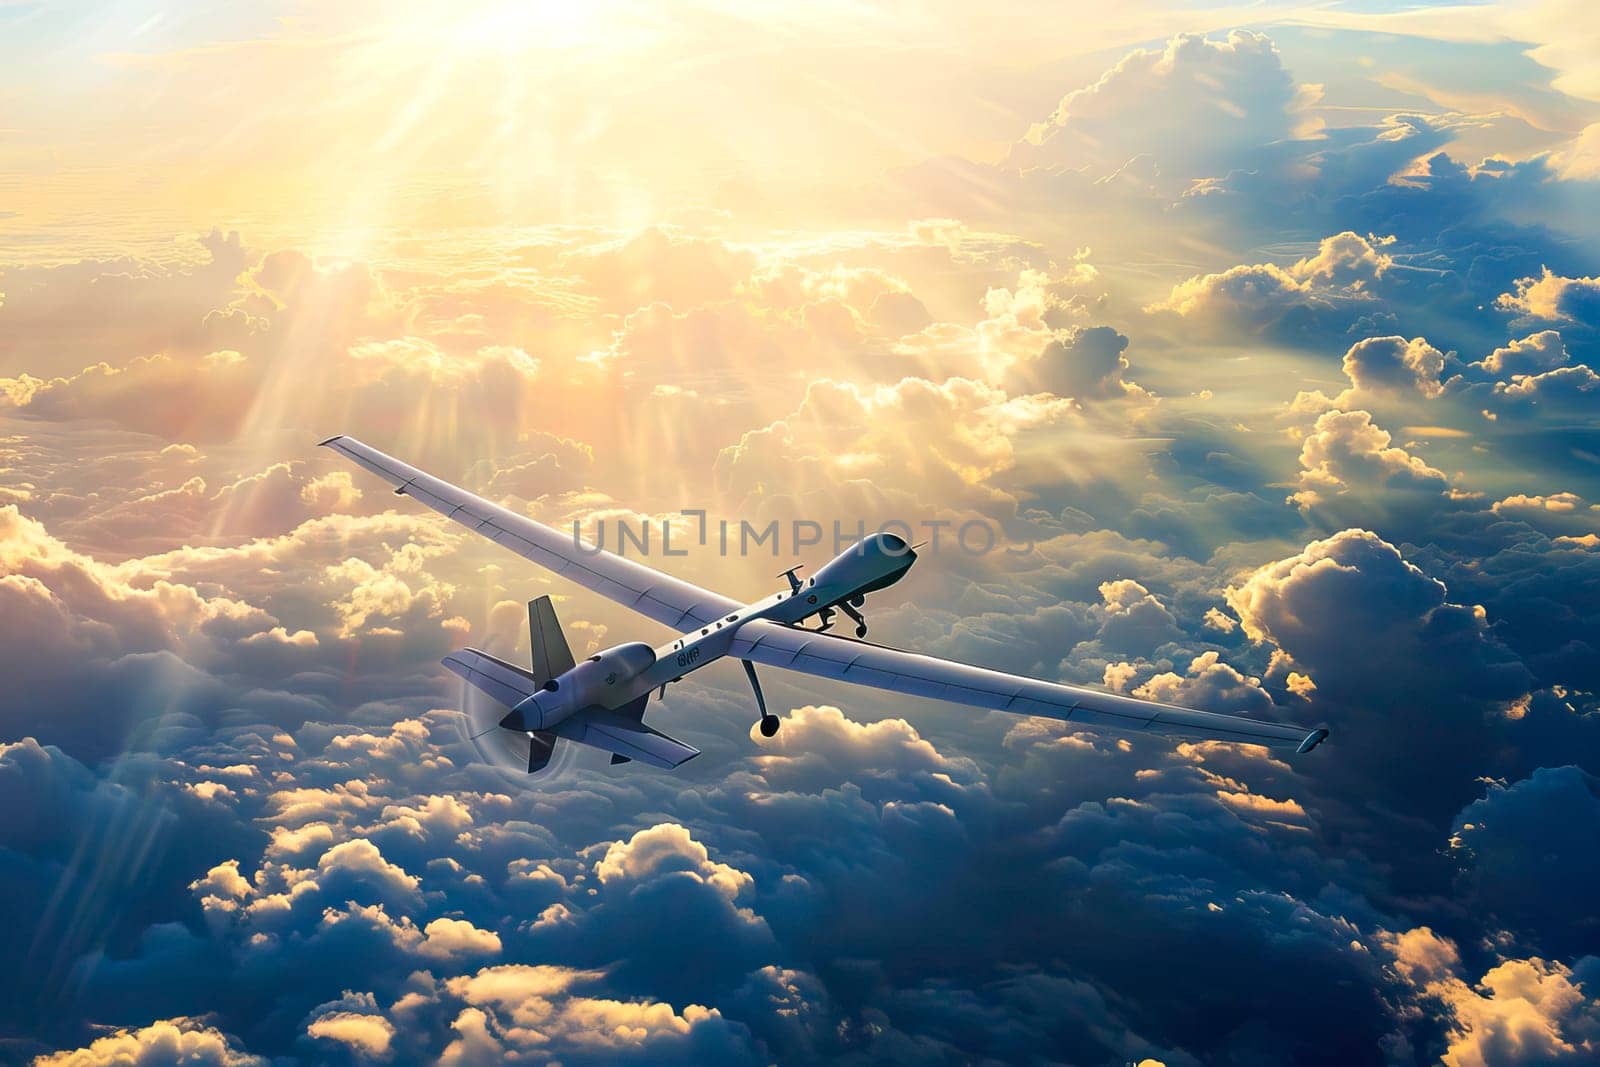 A military unmanned aerial vehicle soaring in the sky high above the clouds.